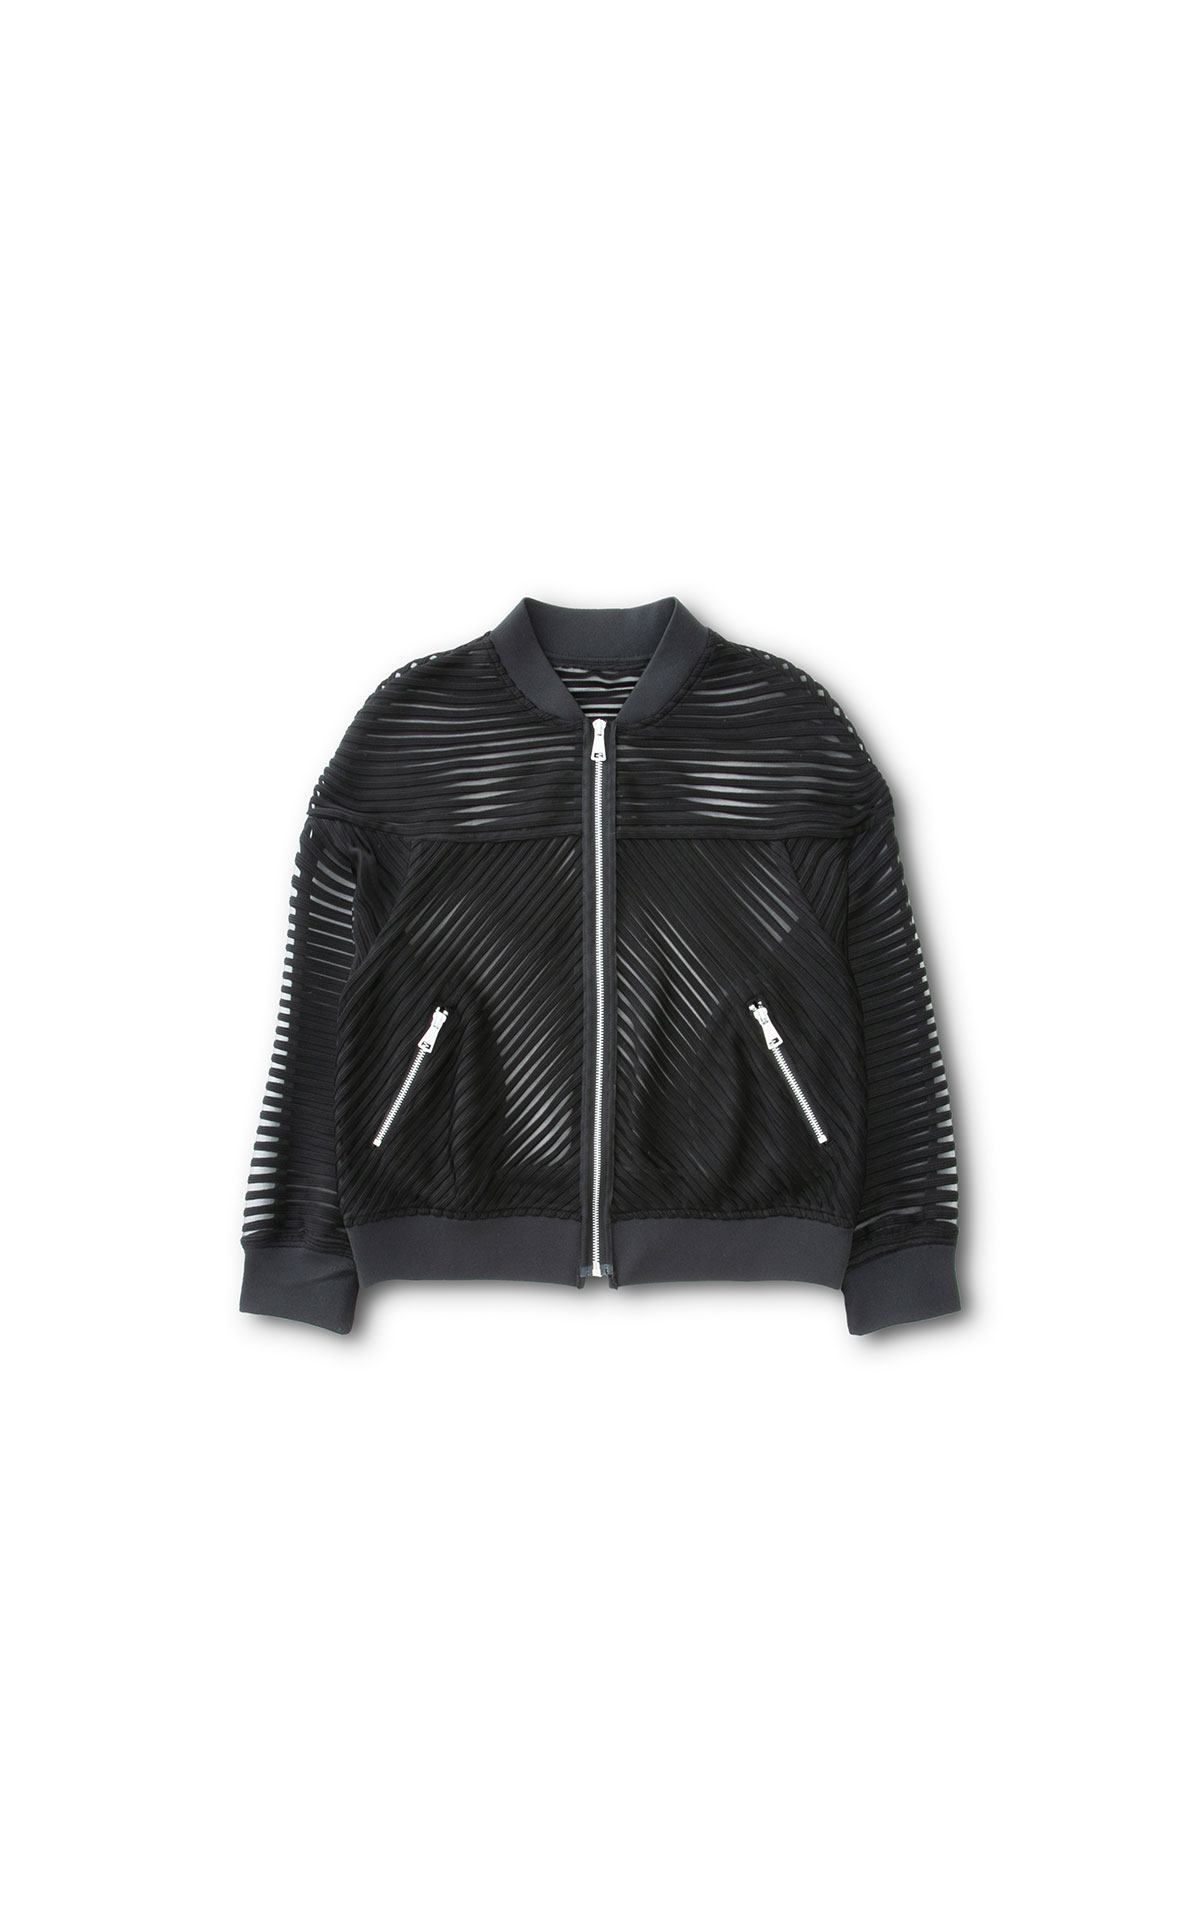 DKNY Zip up jacket from Bicester Village